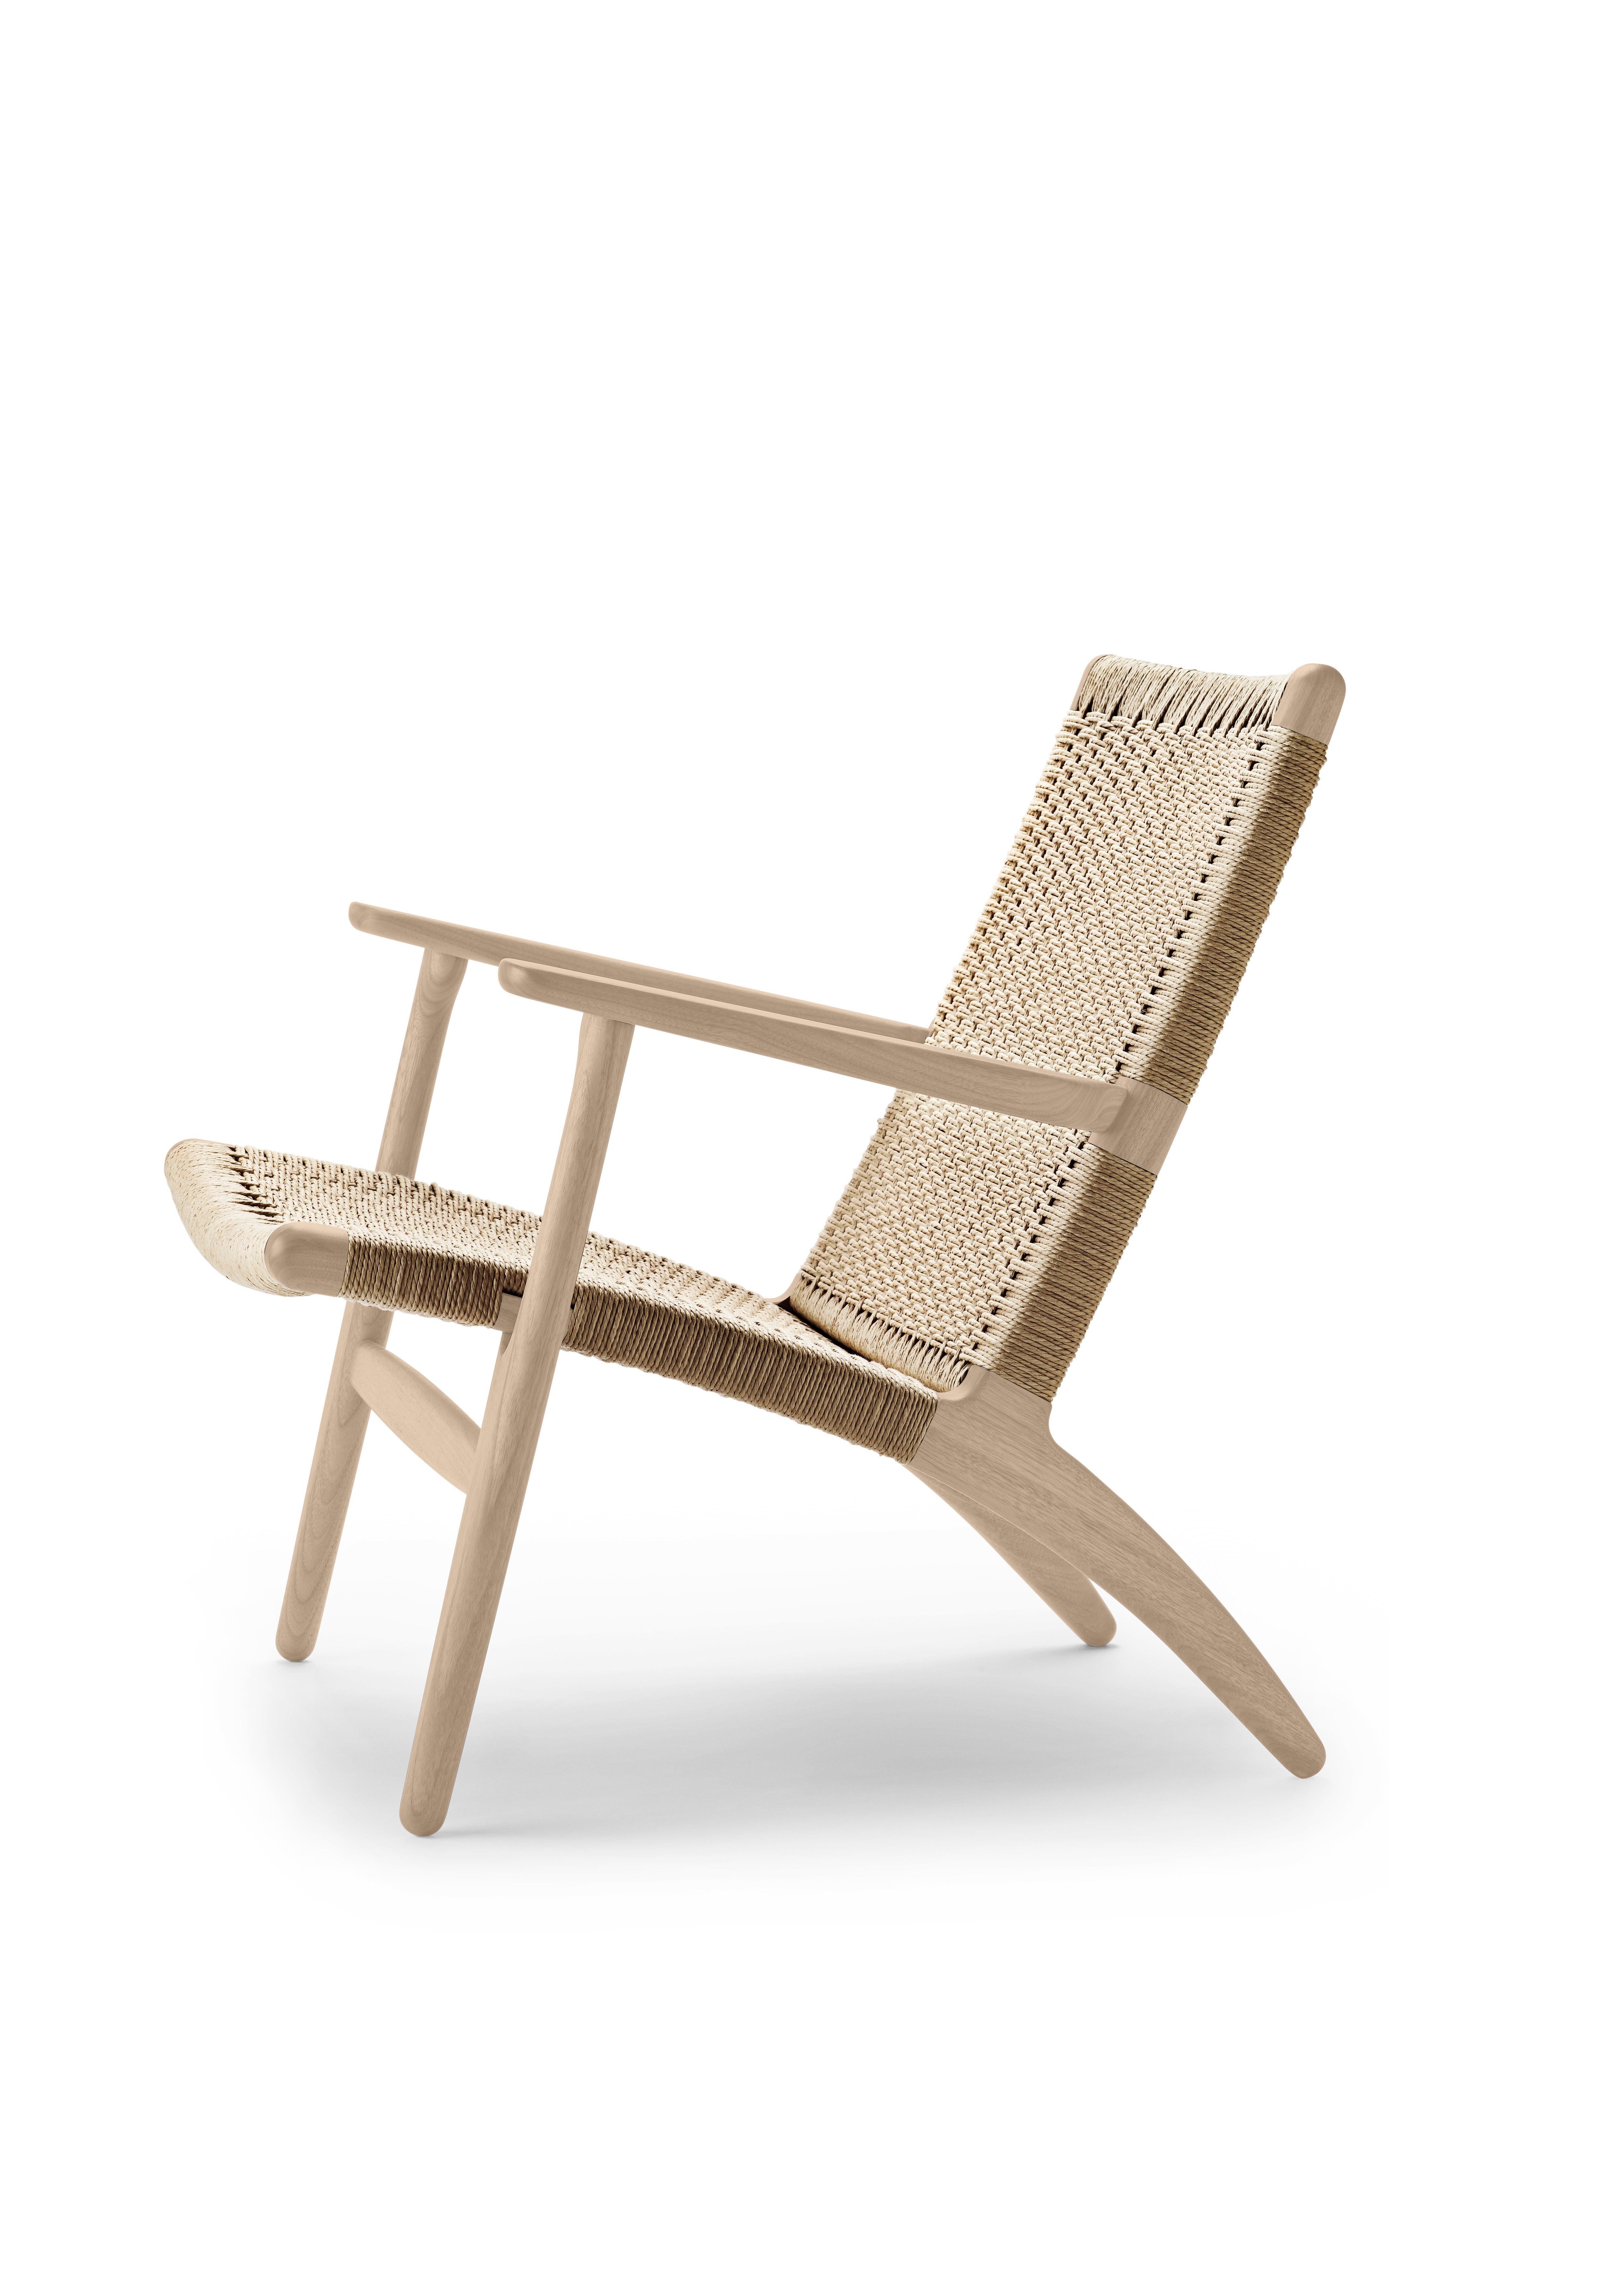 The CH25 lounge chair, like many of Hans J. Wegnerâ€™s other iconic designs, is clean and simple in its distinctive shape. But its introduction caused a stir due to Wegnerâ€™s choice of materials on the backrest and seat. The woven paper cord, a